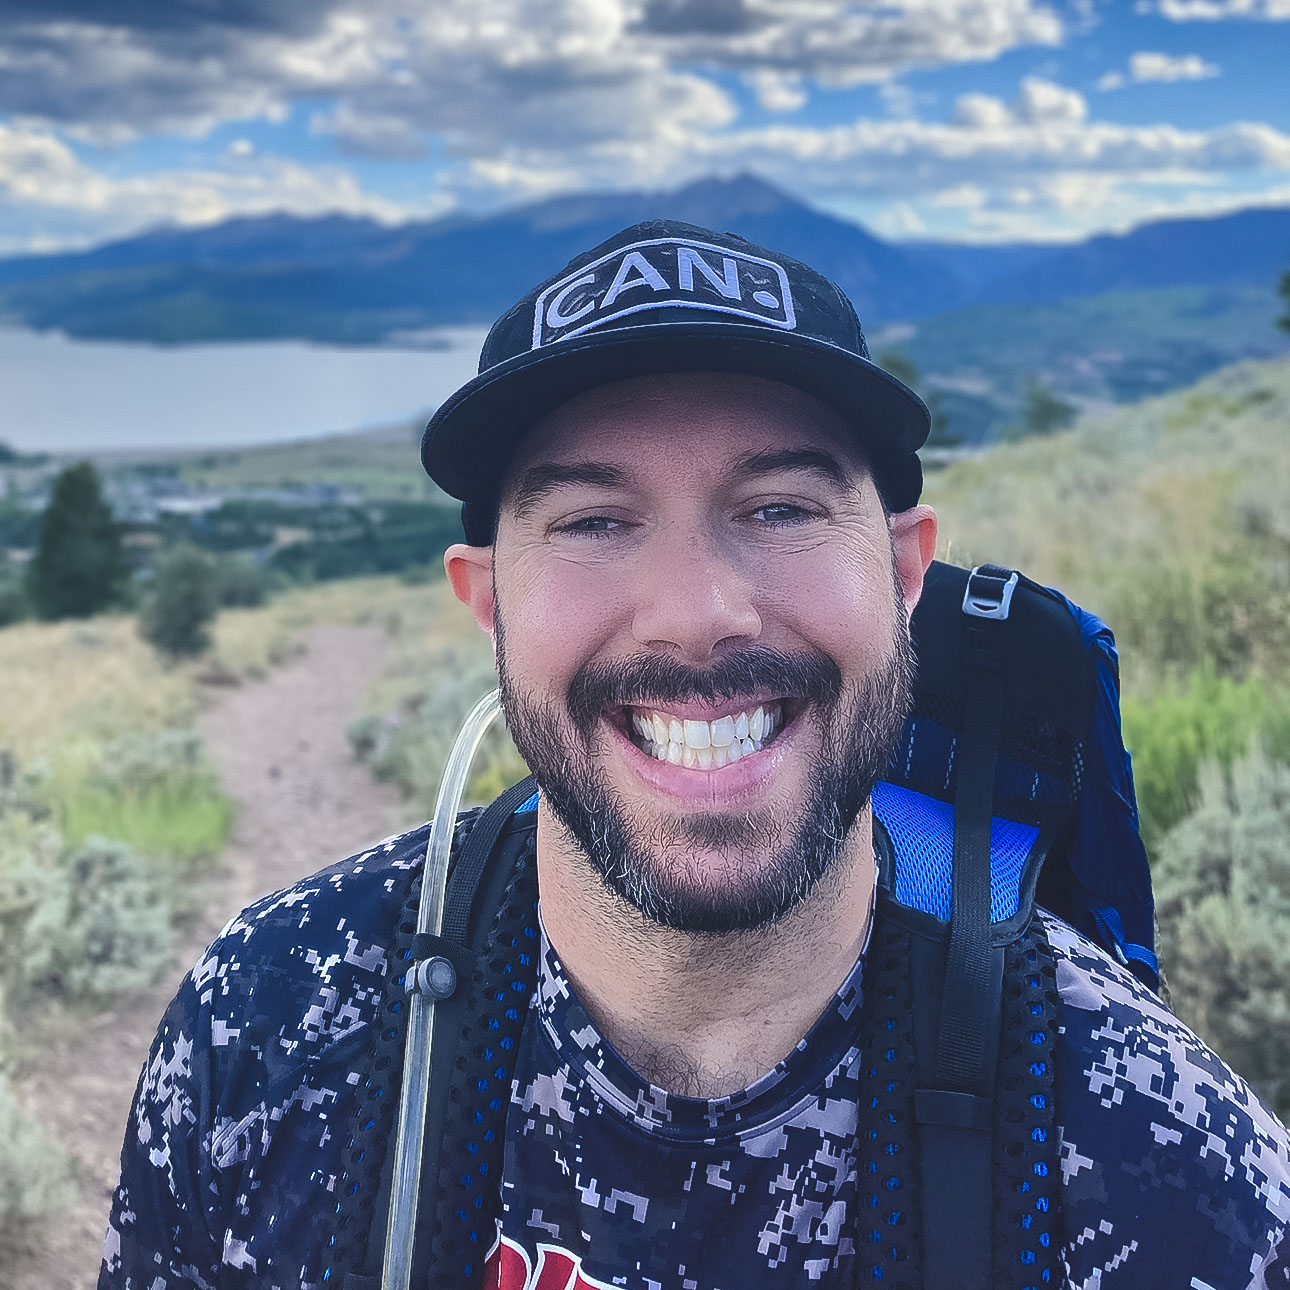 A smiling, bearded person wearing a hat and hiking pack posing before water and mountains